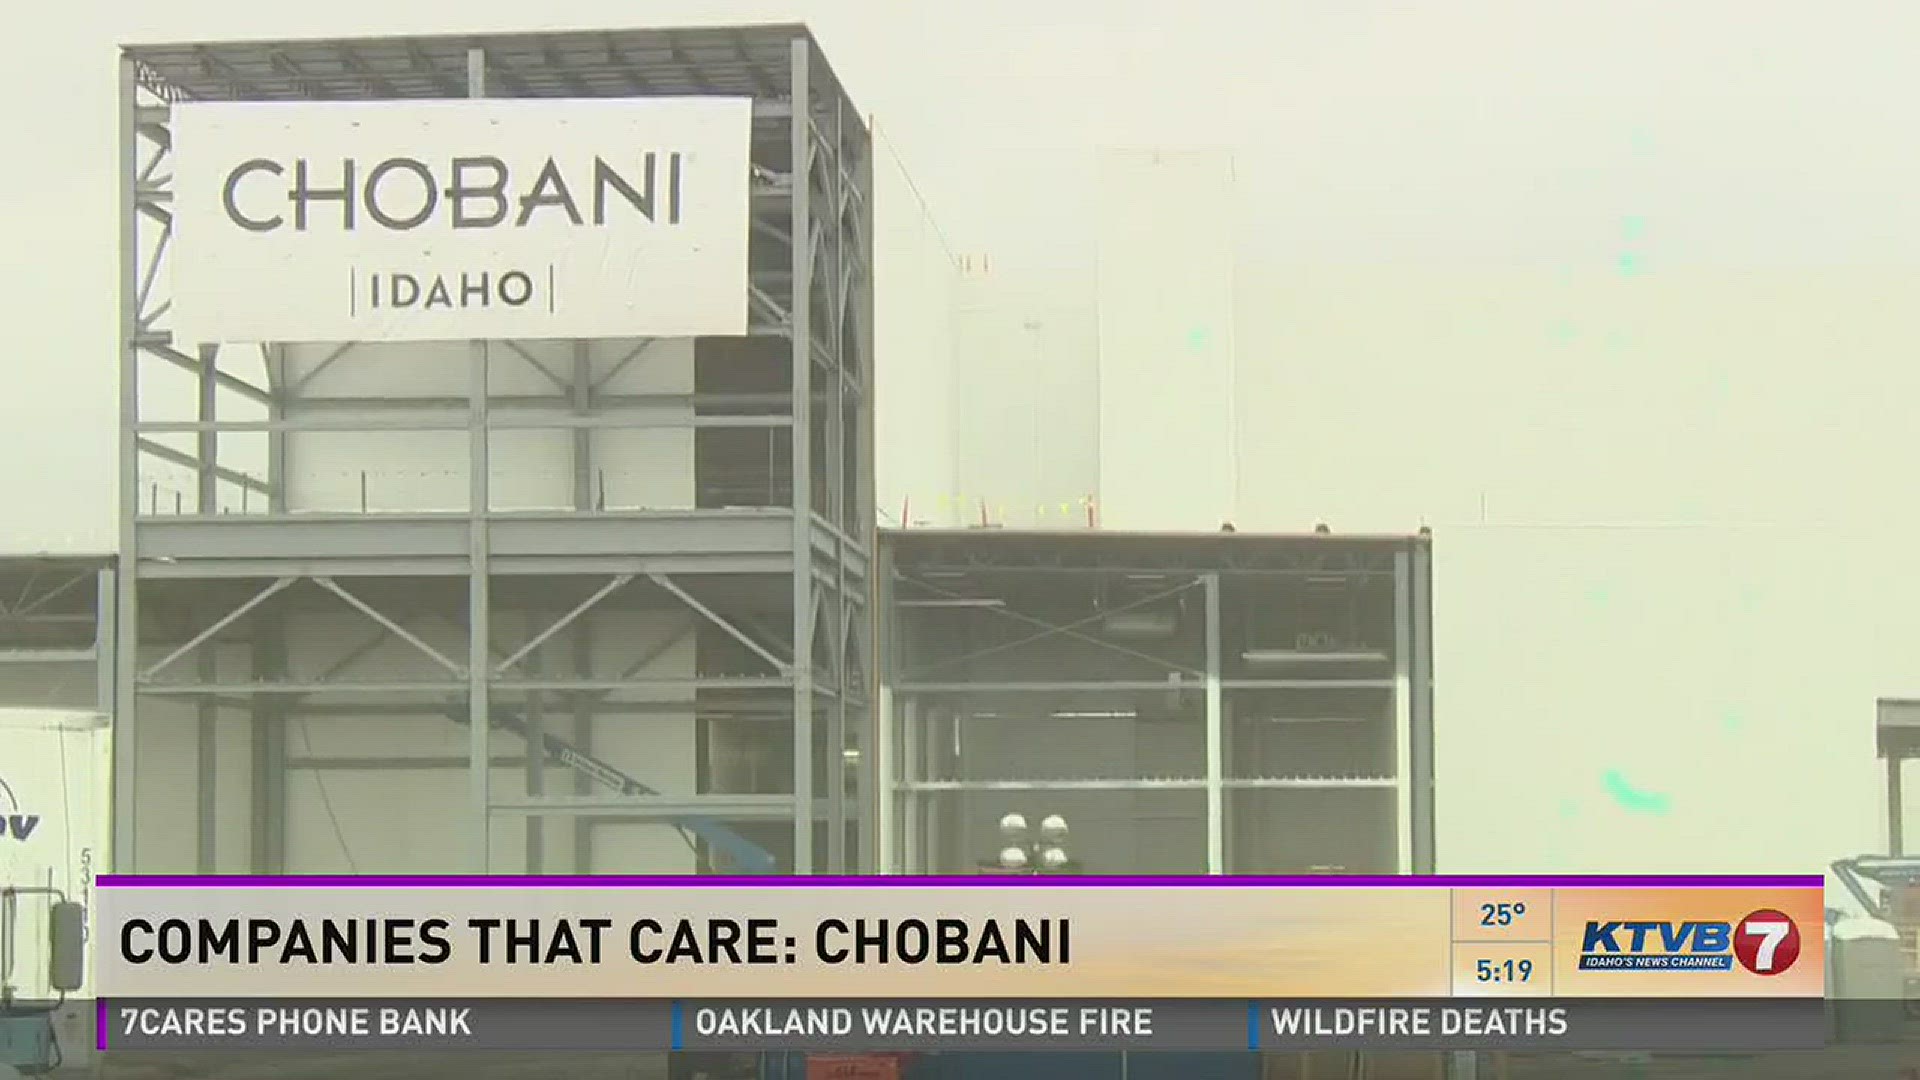 KTVB's Larry Gebert talks with Alyson Outen from Chobani about why they are a Company that Cares.